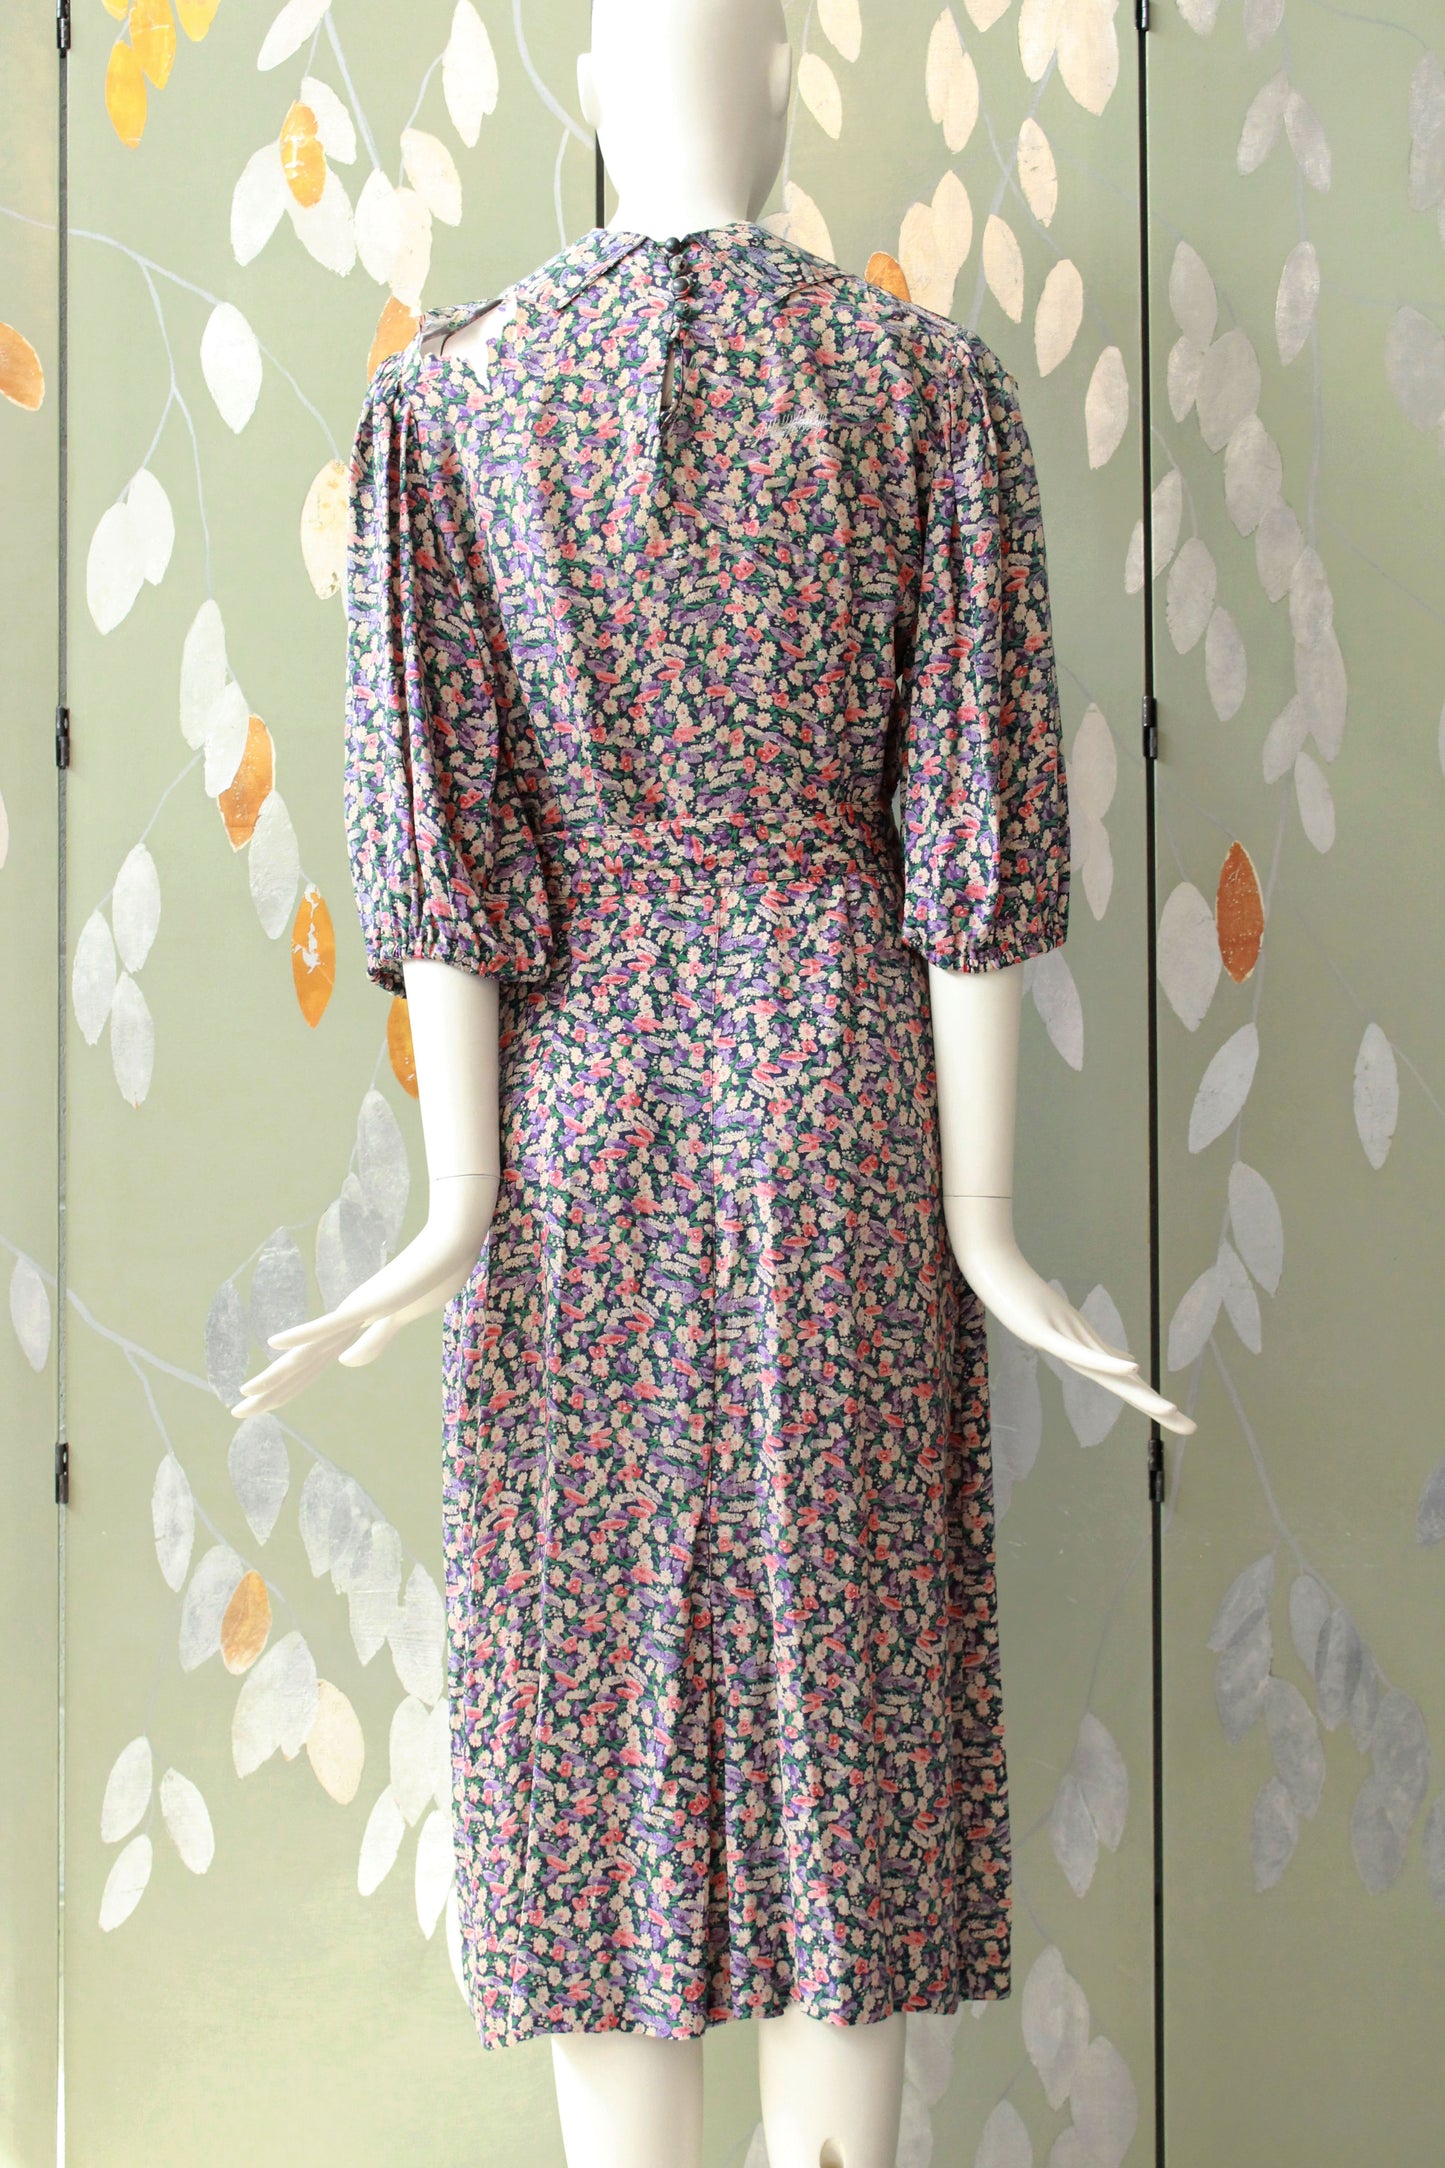 1930s Floral Day Dress with Peter Pan Collar and Matching Celluloid Belt, Size Large, Wounded Bird